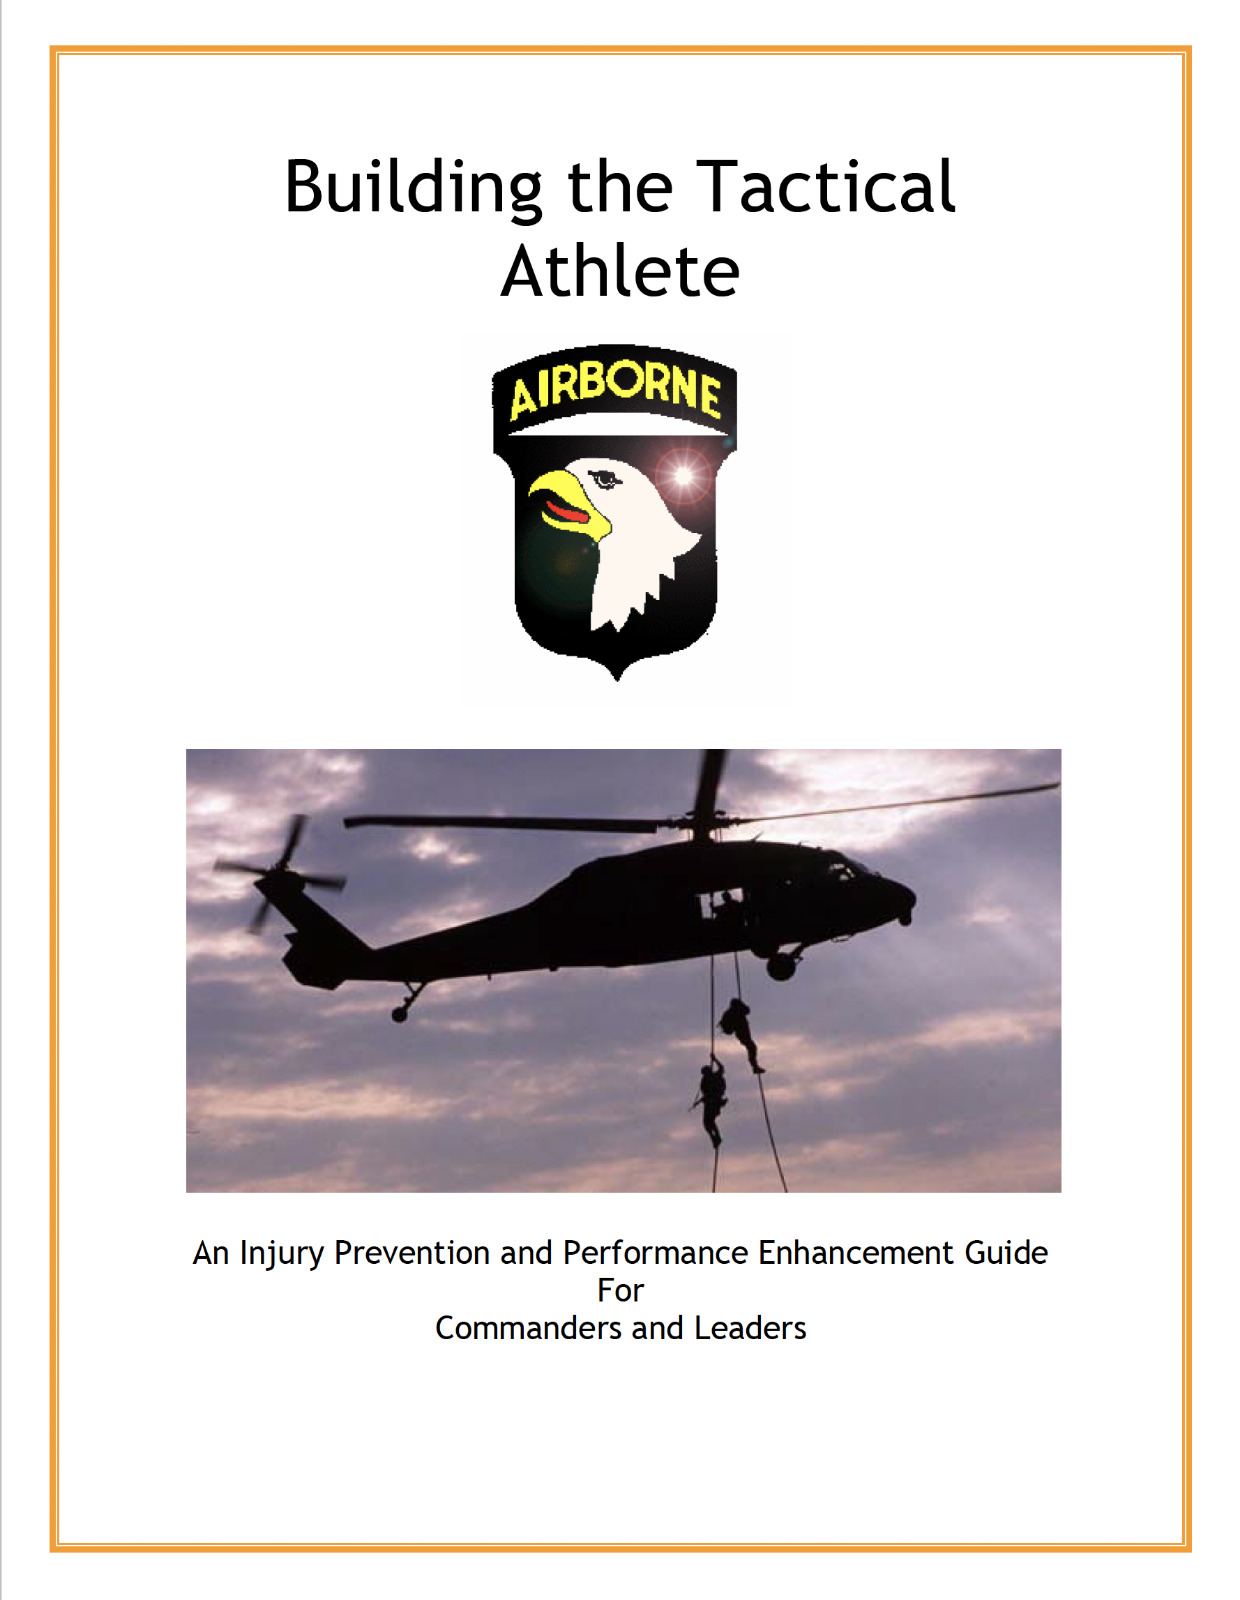 101st Airborne Air Assault & Army TACTICAL SOLDIER ATHLETE PT - 2 Manuals On CD